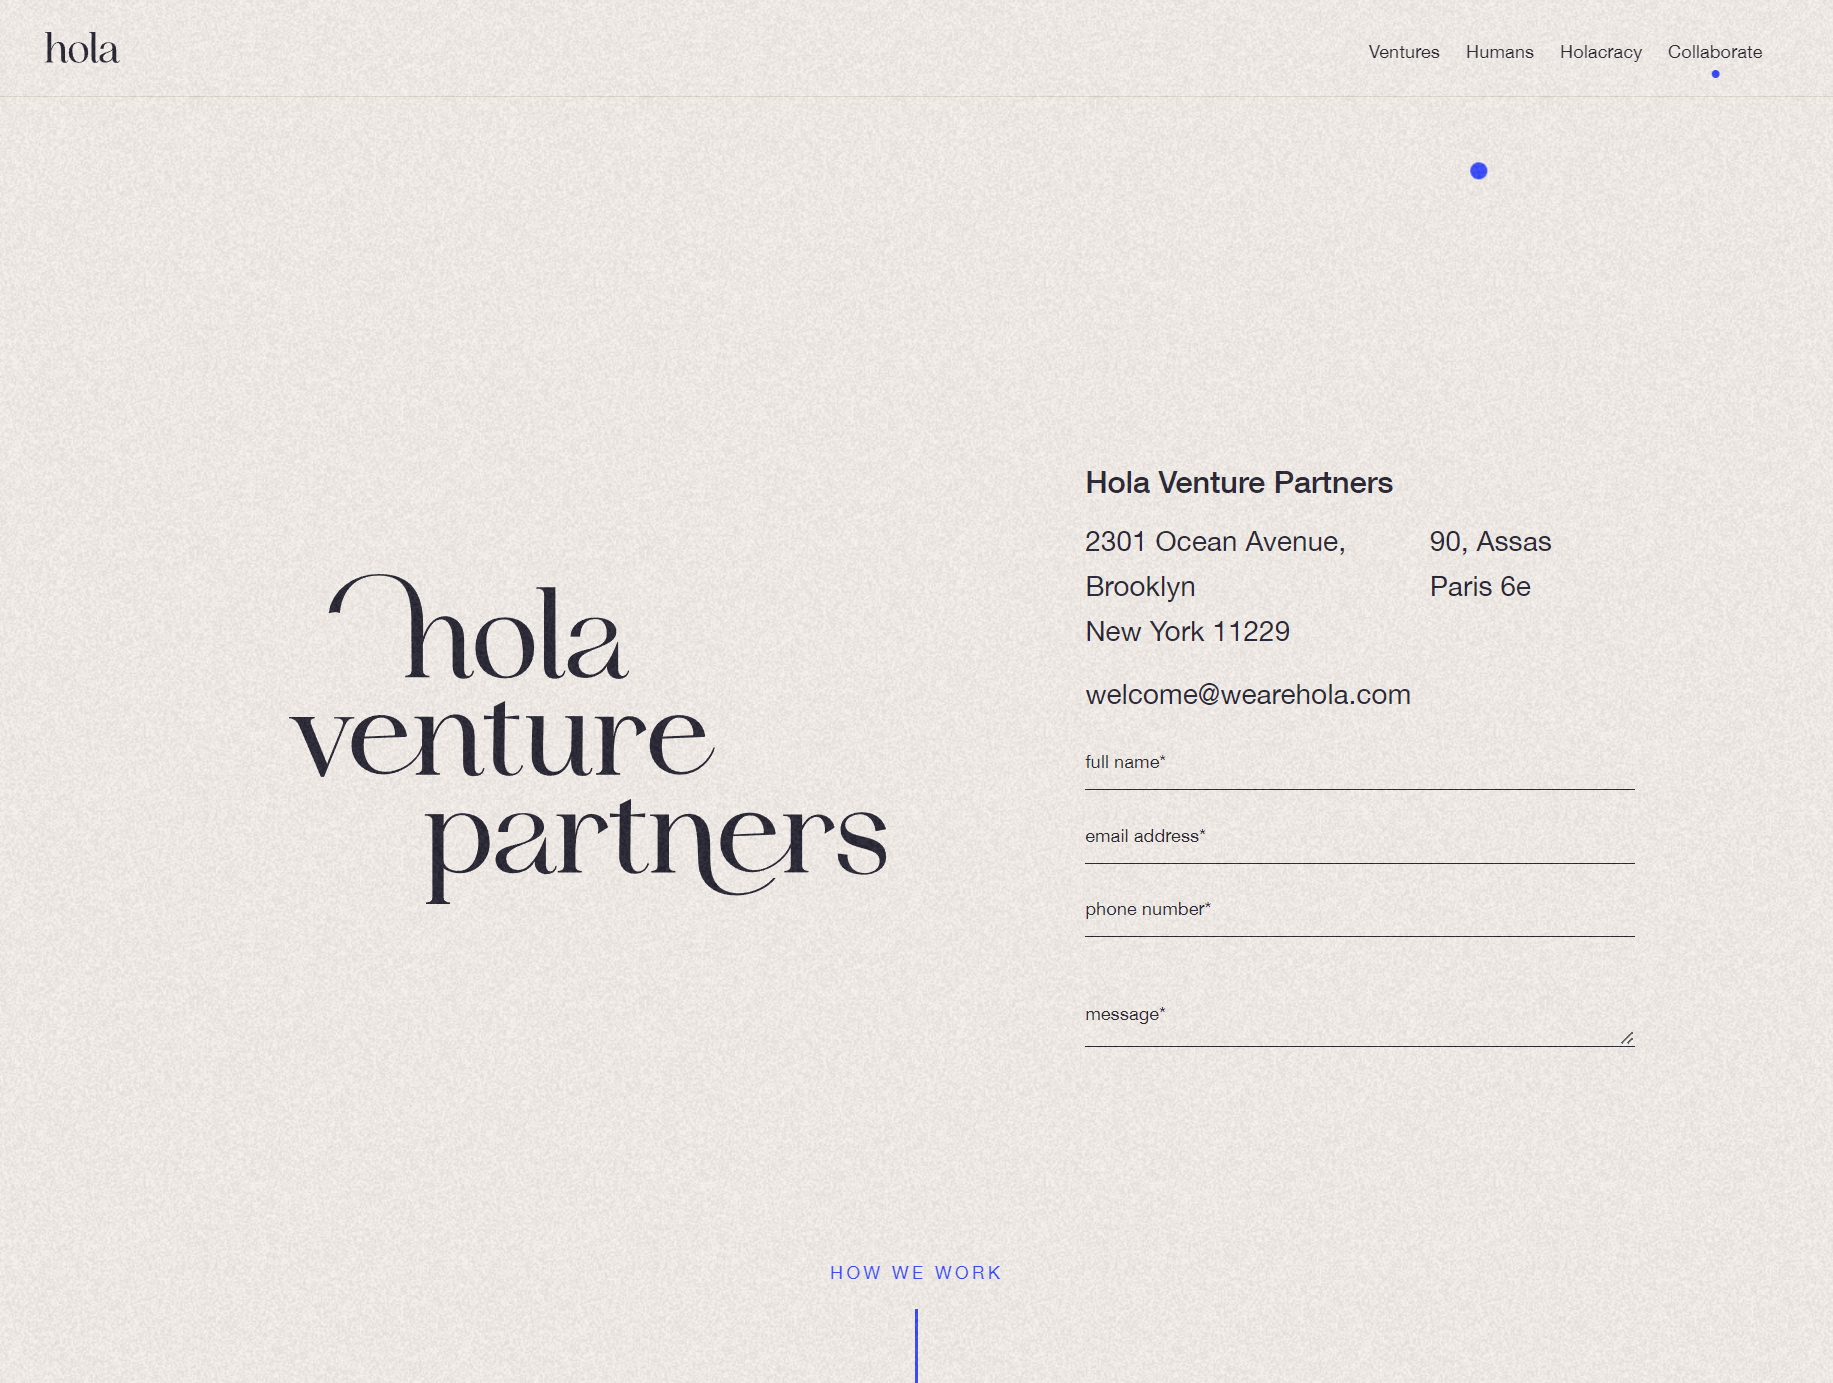 Contact - Hola Venture Partners